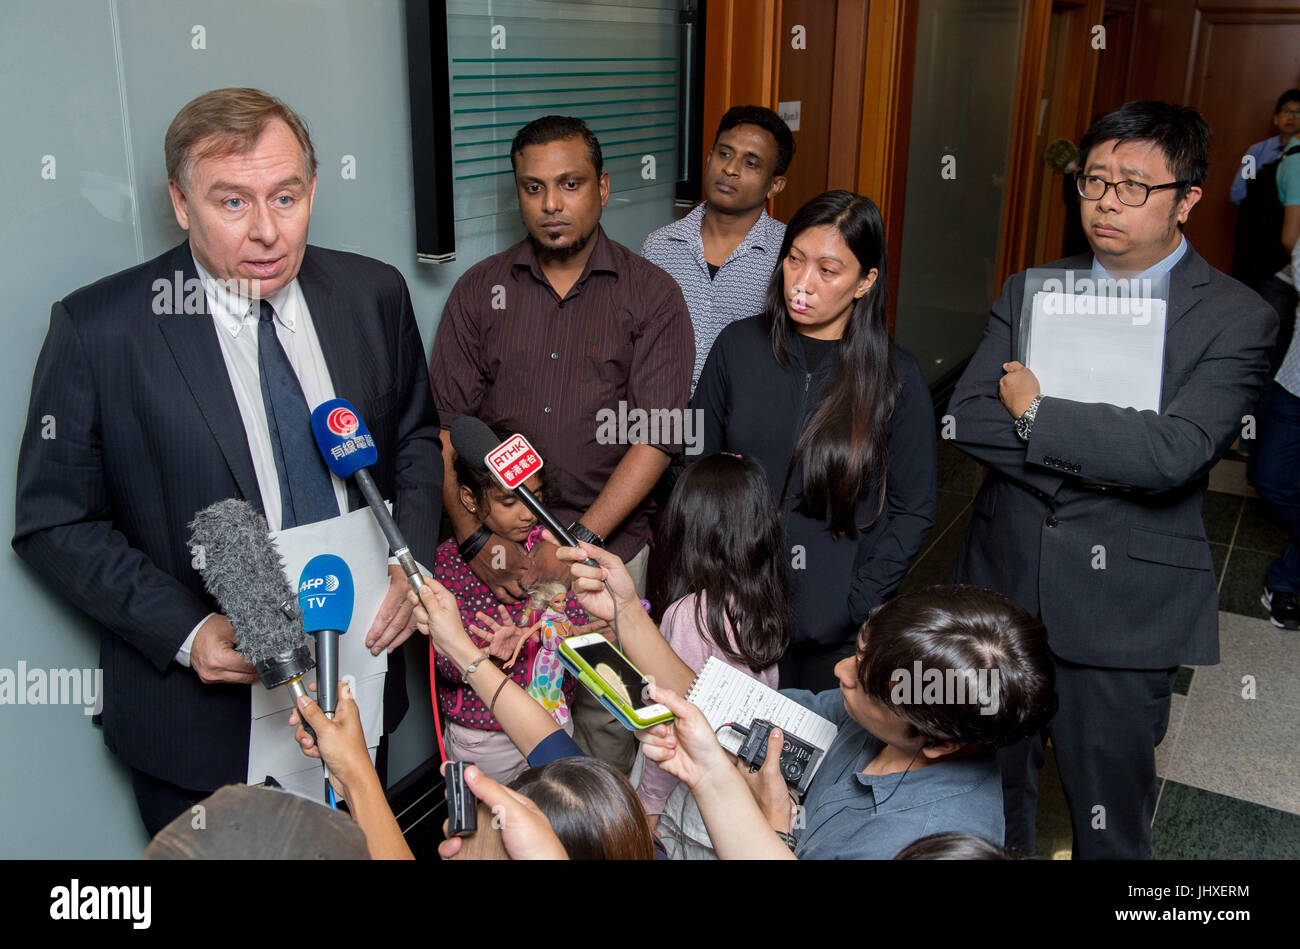 Hong Kong, Hong Kong SAR, China. 17th July, 2017. The Snowden Guardian angels appear at the Torture claims appeal Board.Despite arriving in Hong Kong in different years the families claims have been link due to their harbouring of whistleblower Edward Snowden. Barrister Robert Tibbo speaks to the press (L), Supun Thilina Kellapatha (2nd L with his daughter Sethumdi), Ajith Puspa(3rd R), Vanessa Mae Rodel (2nd R with her daughter Keana) and lawyer Jonathan Man Credit: Jayne Russell/ZUMA Wire/Alamy Live News Stock Photo